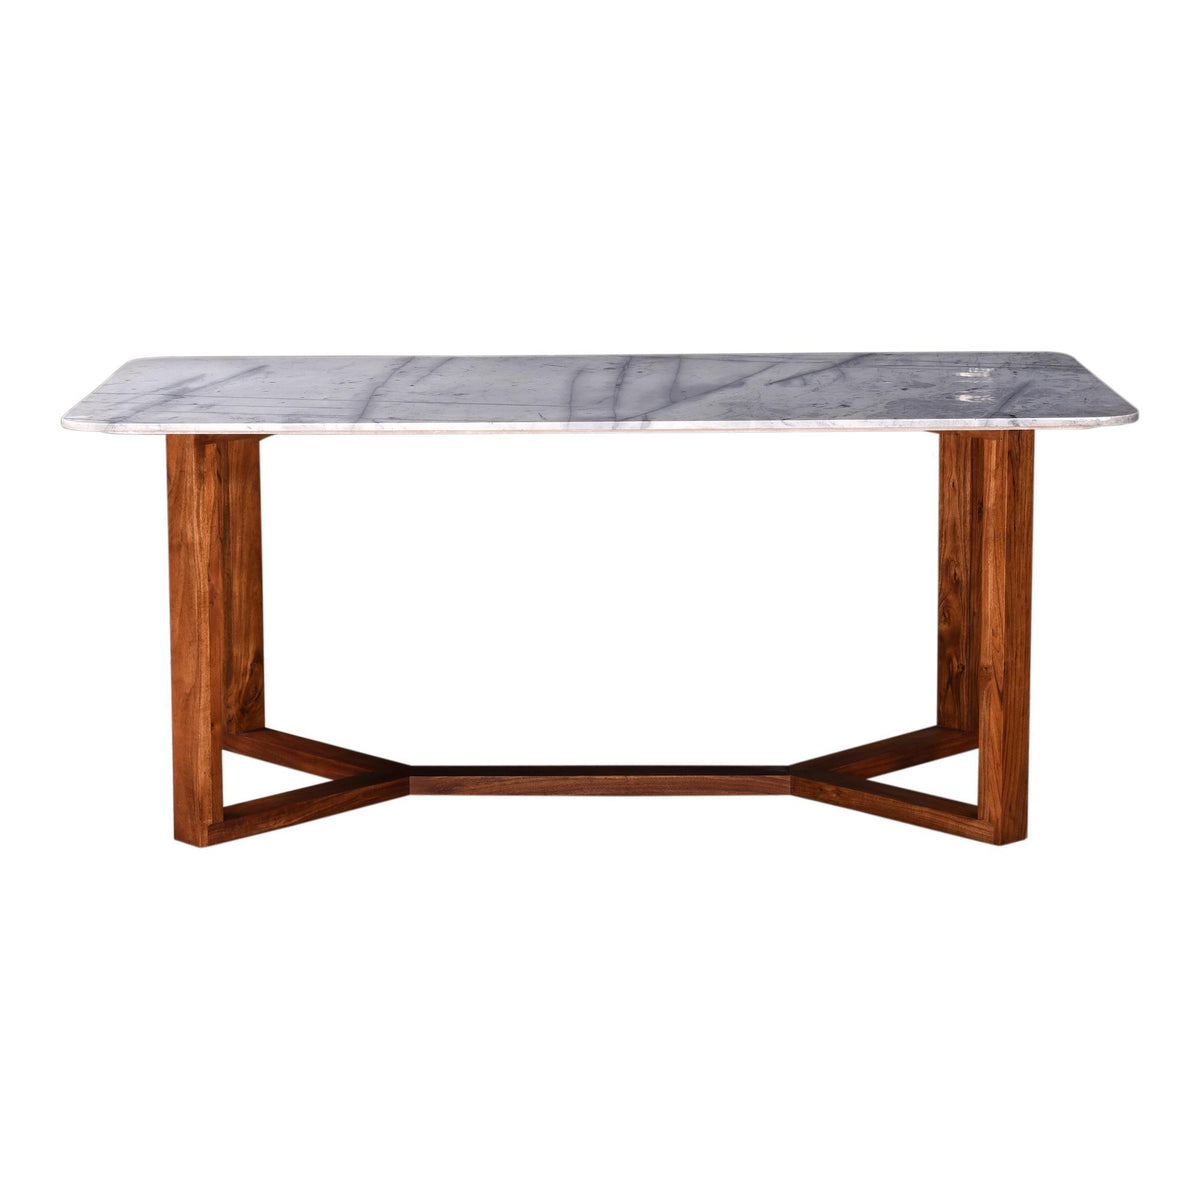 Moe's Home Collection Jinxx Rectangular Dining Table Brown - JD-1033-18